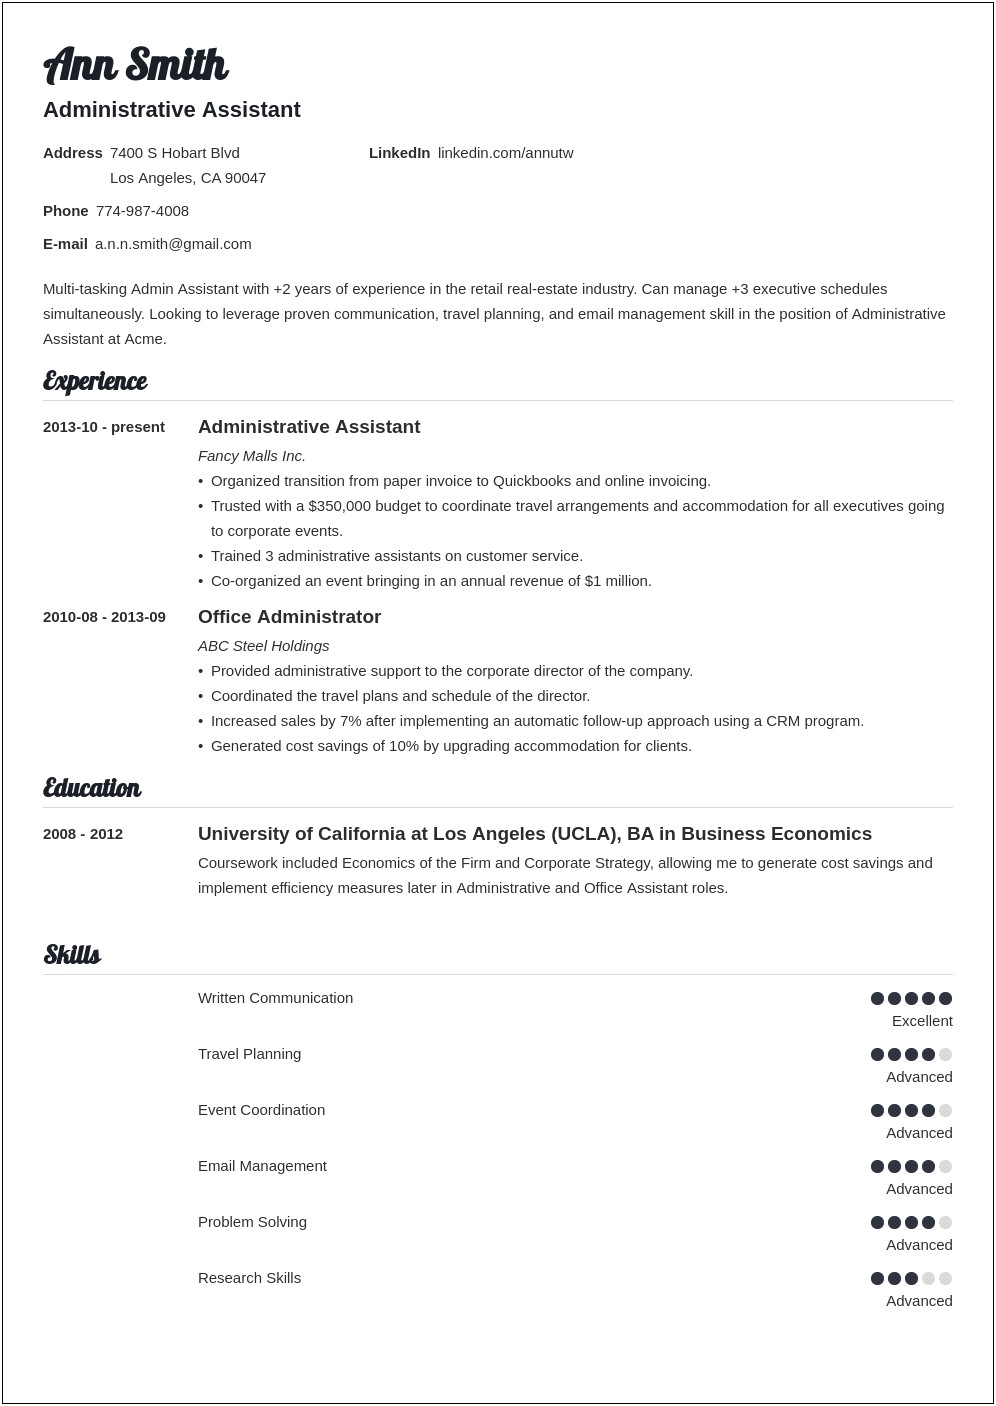 Examples Of Resume Bios For Administrative Assistants